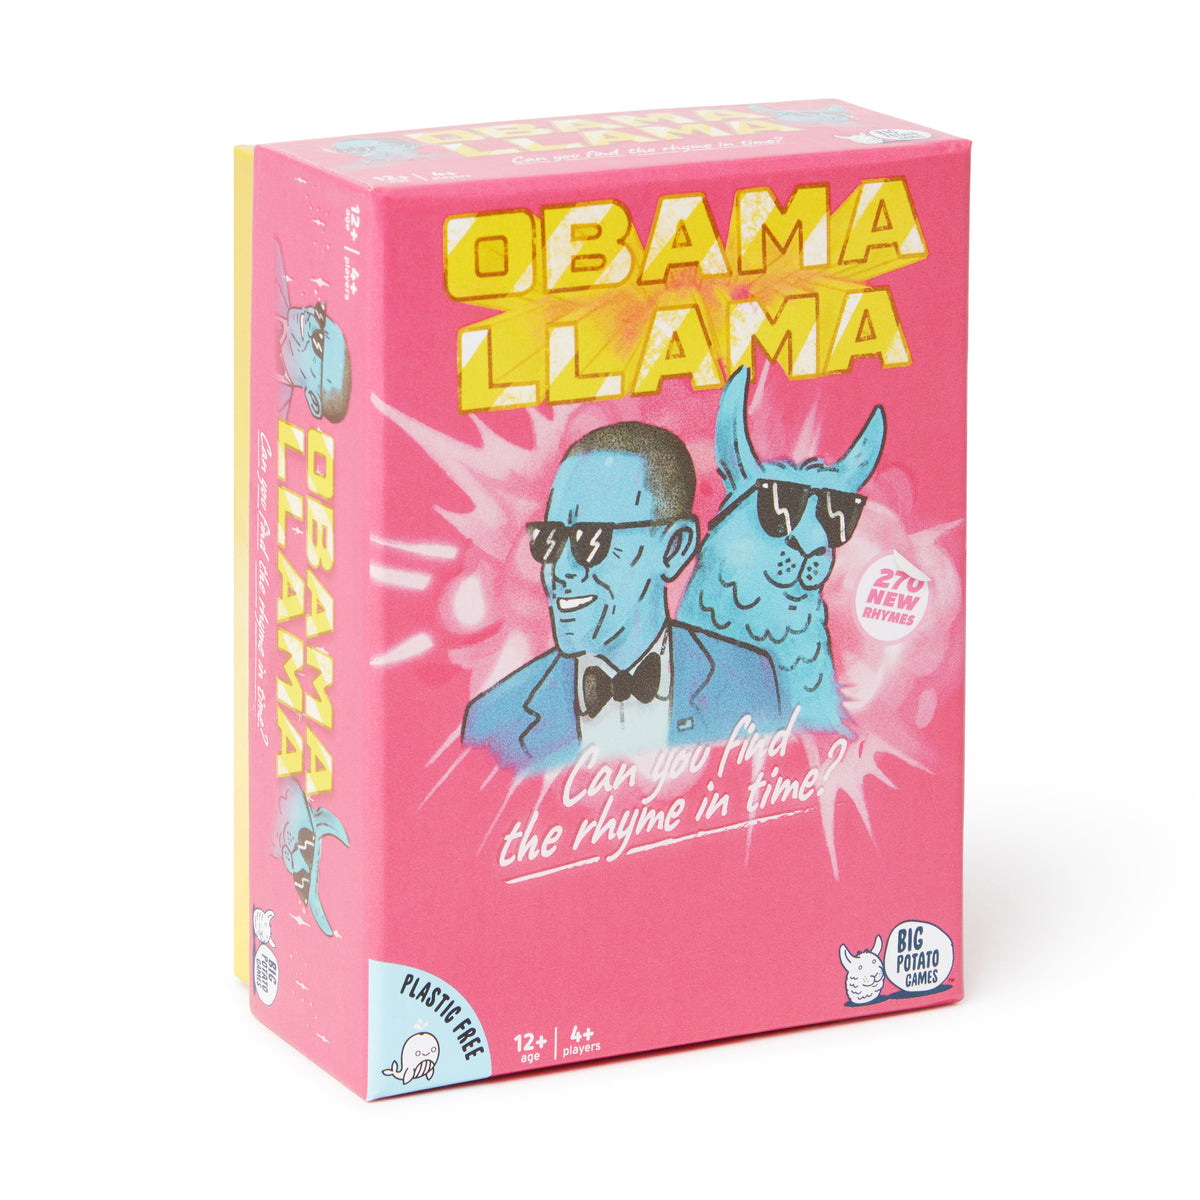 A pink box featuring an illustrated image of Barack Obama and a llama, both with sunglasses on. Houses the game Obama Llama by Big POtato Games